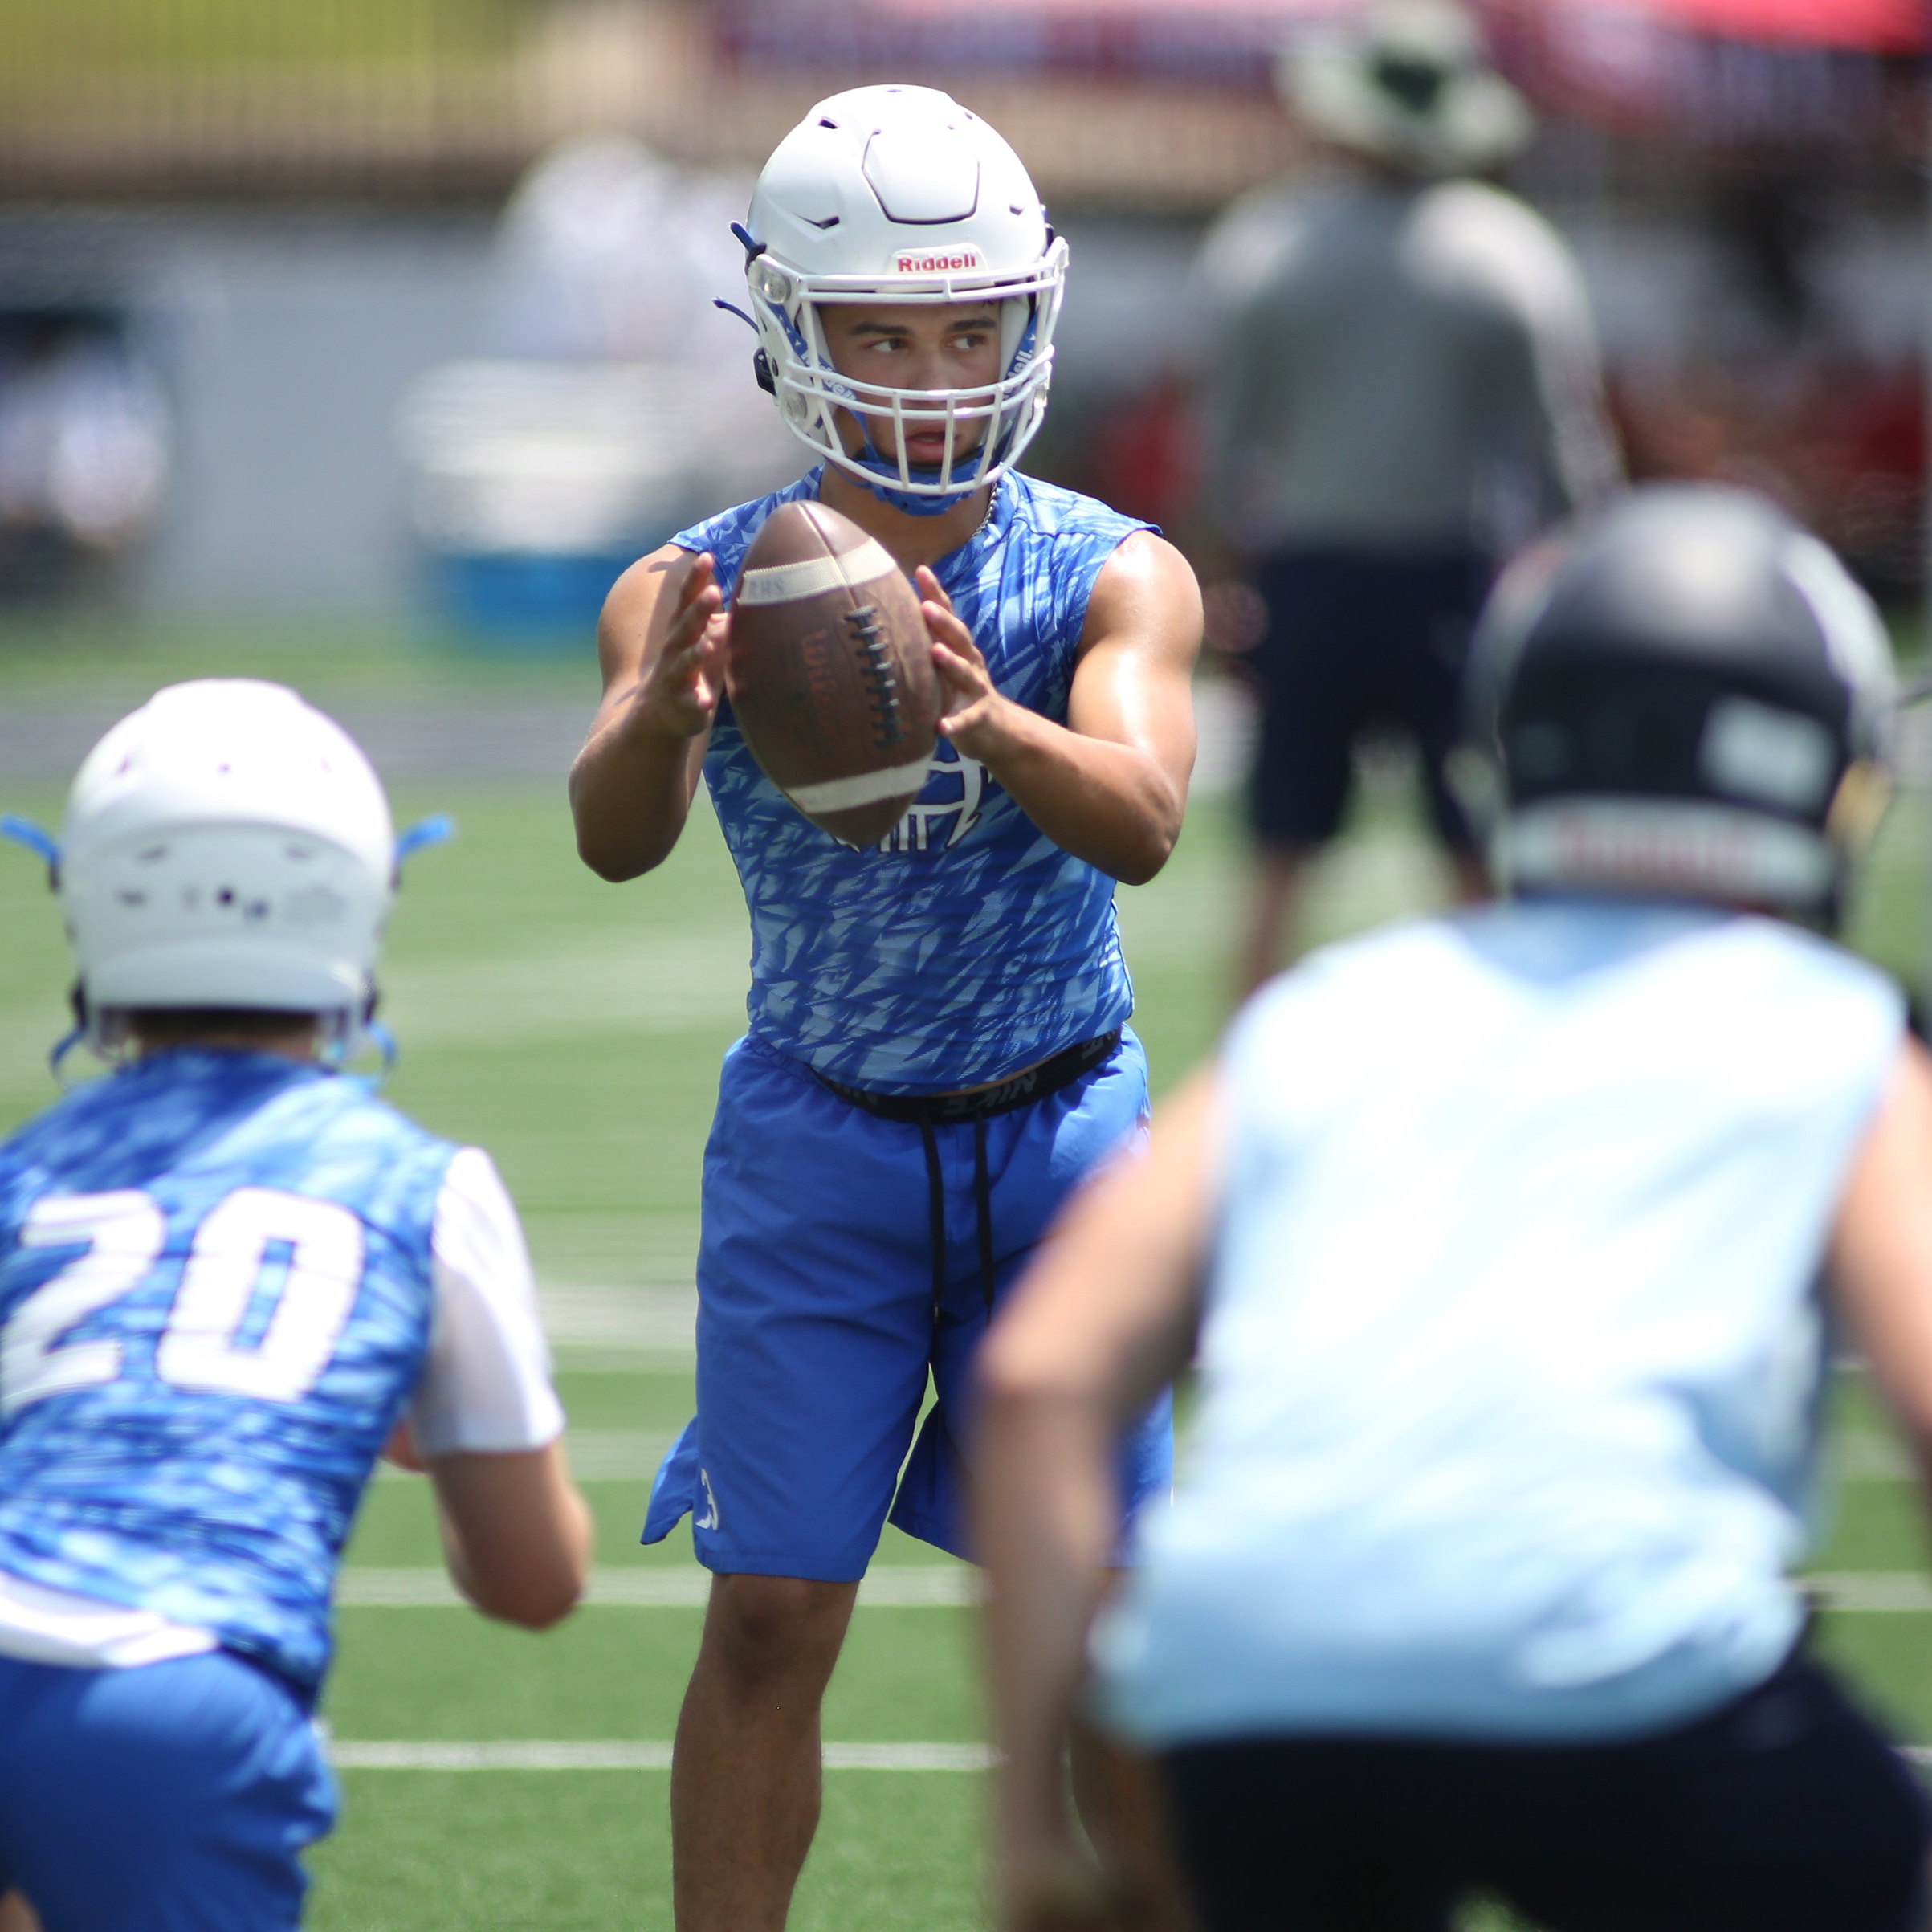 7on7 football returns to Northwest Arkansas and the River Valley